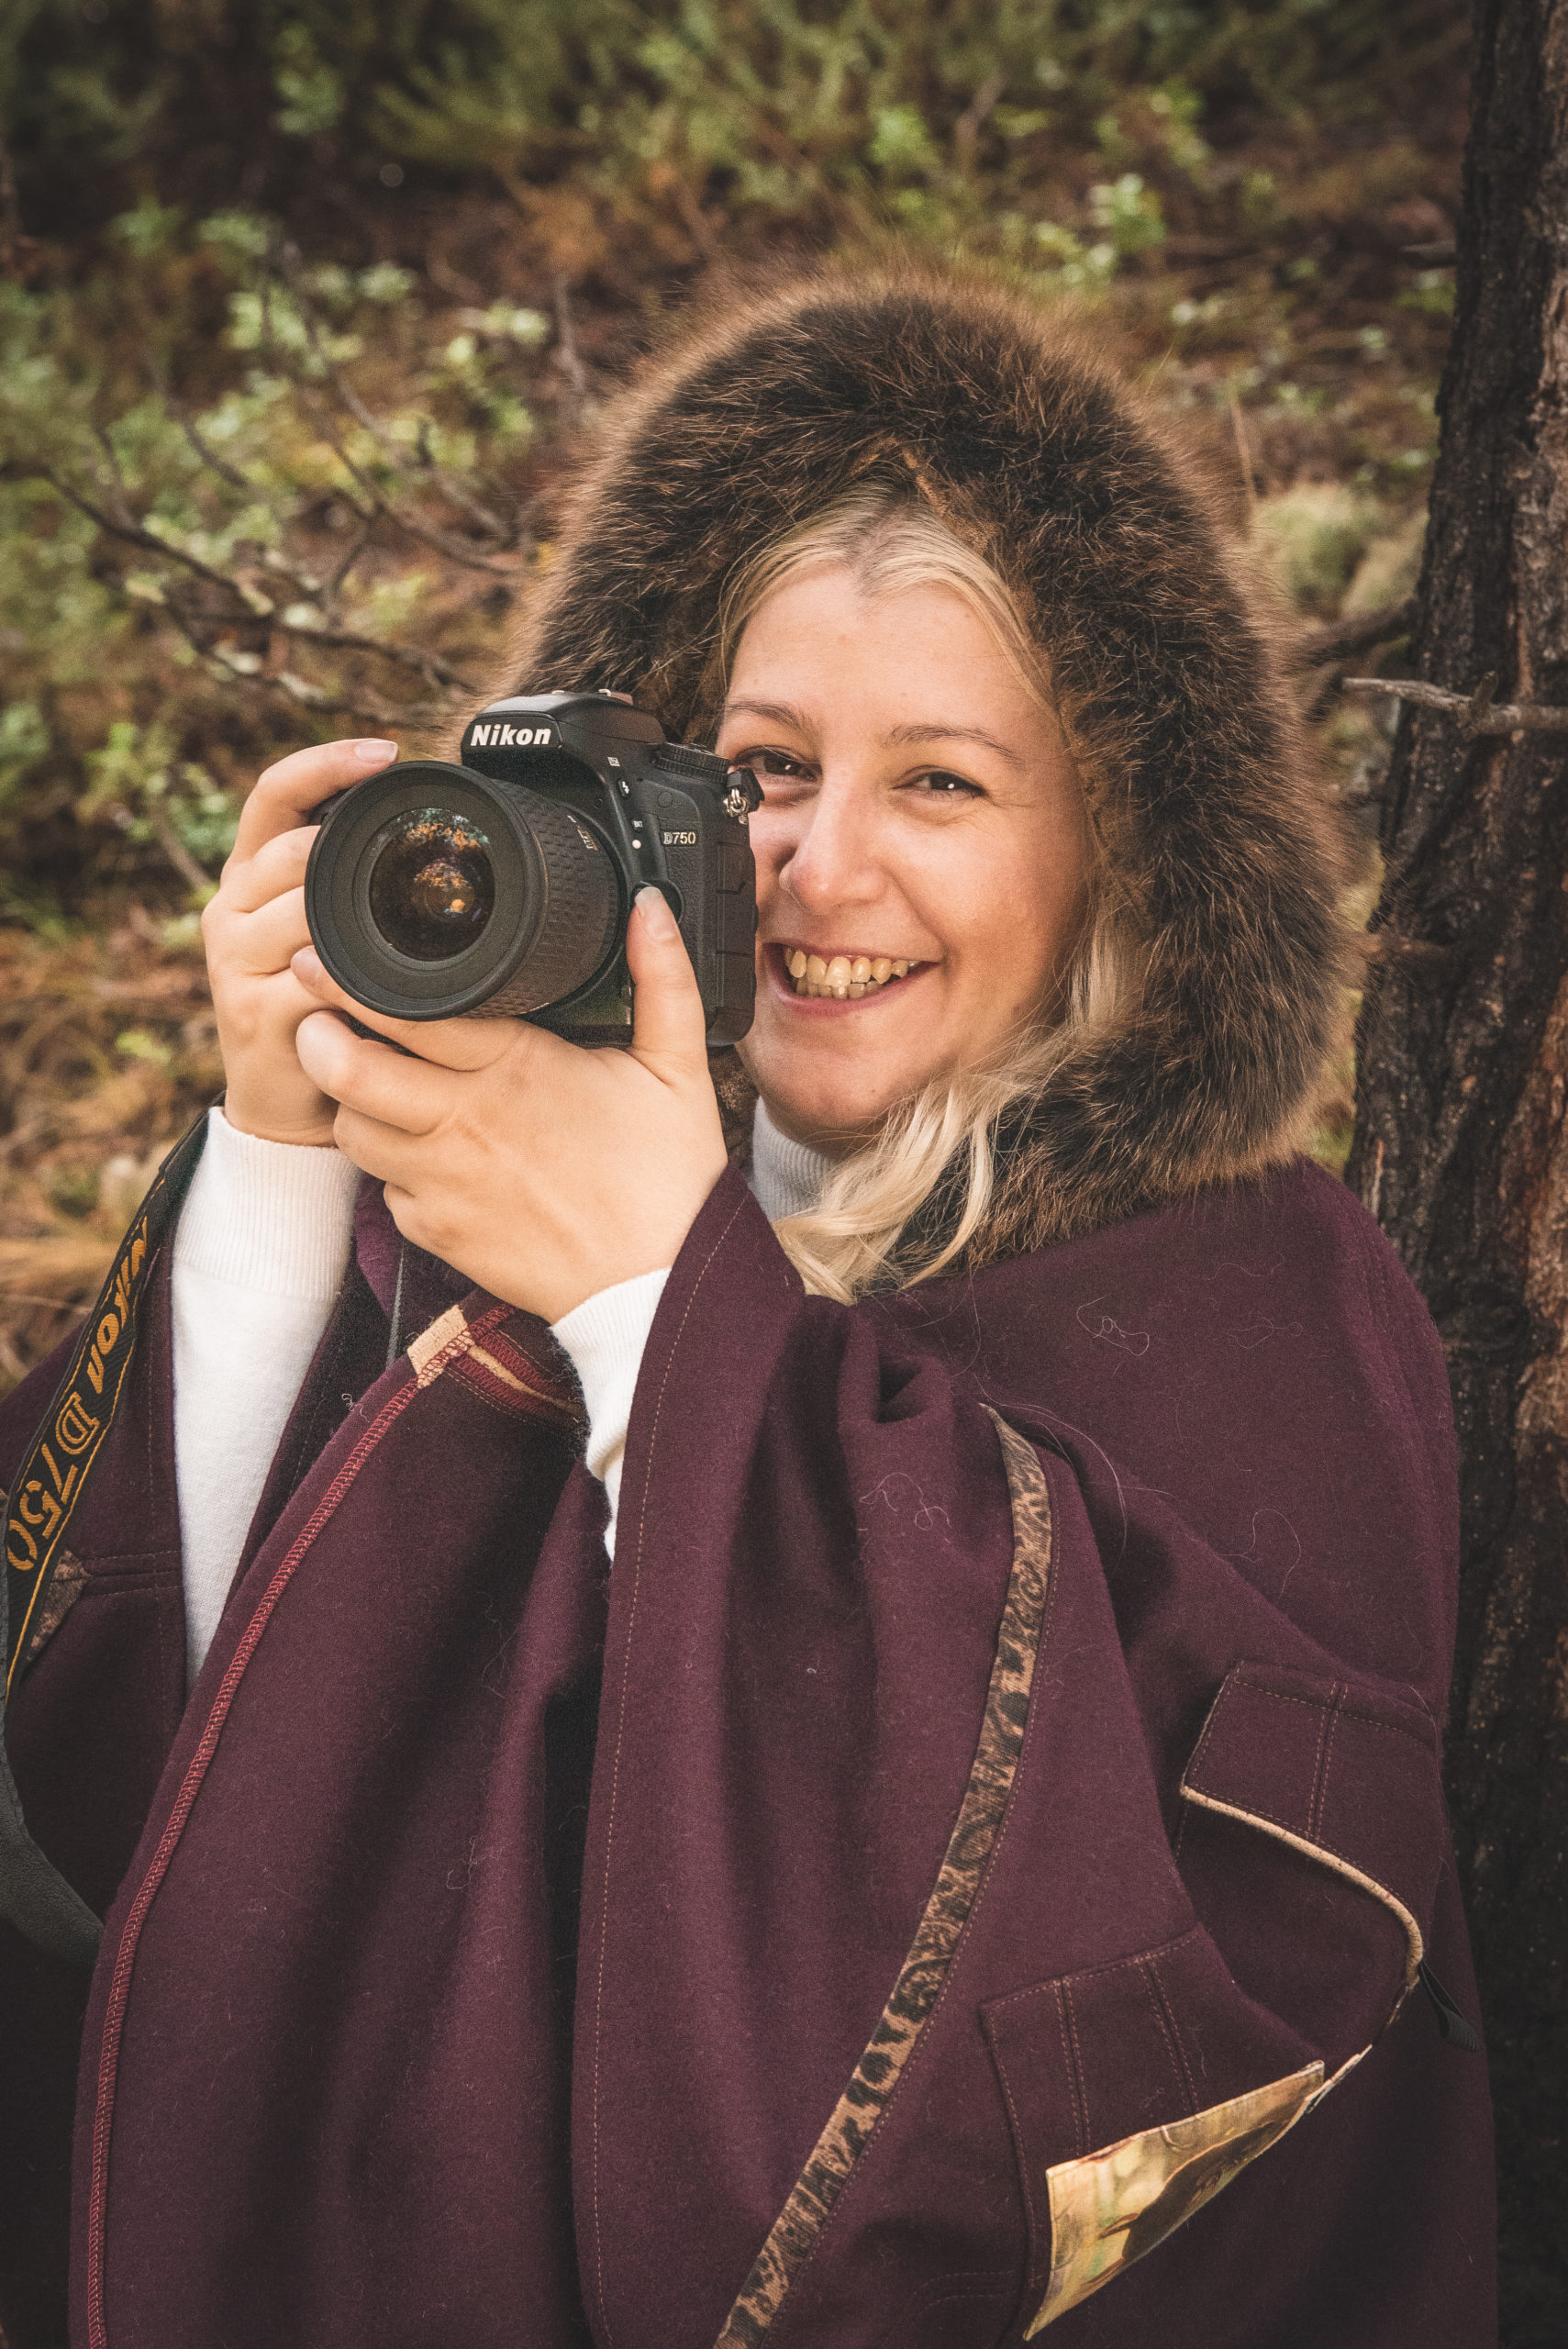 female photographer poses with camera in nature